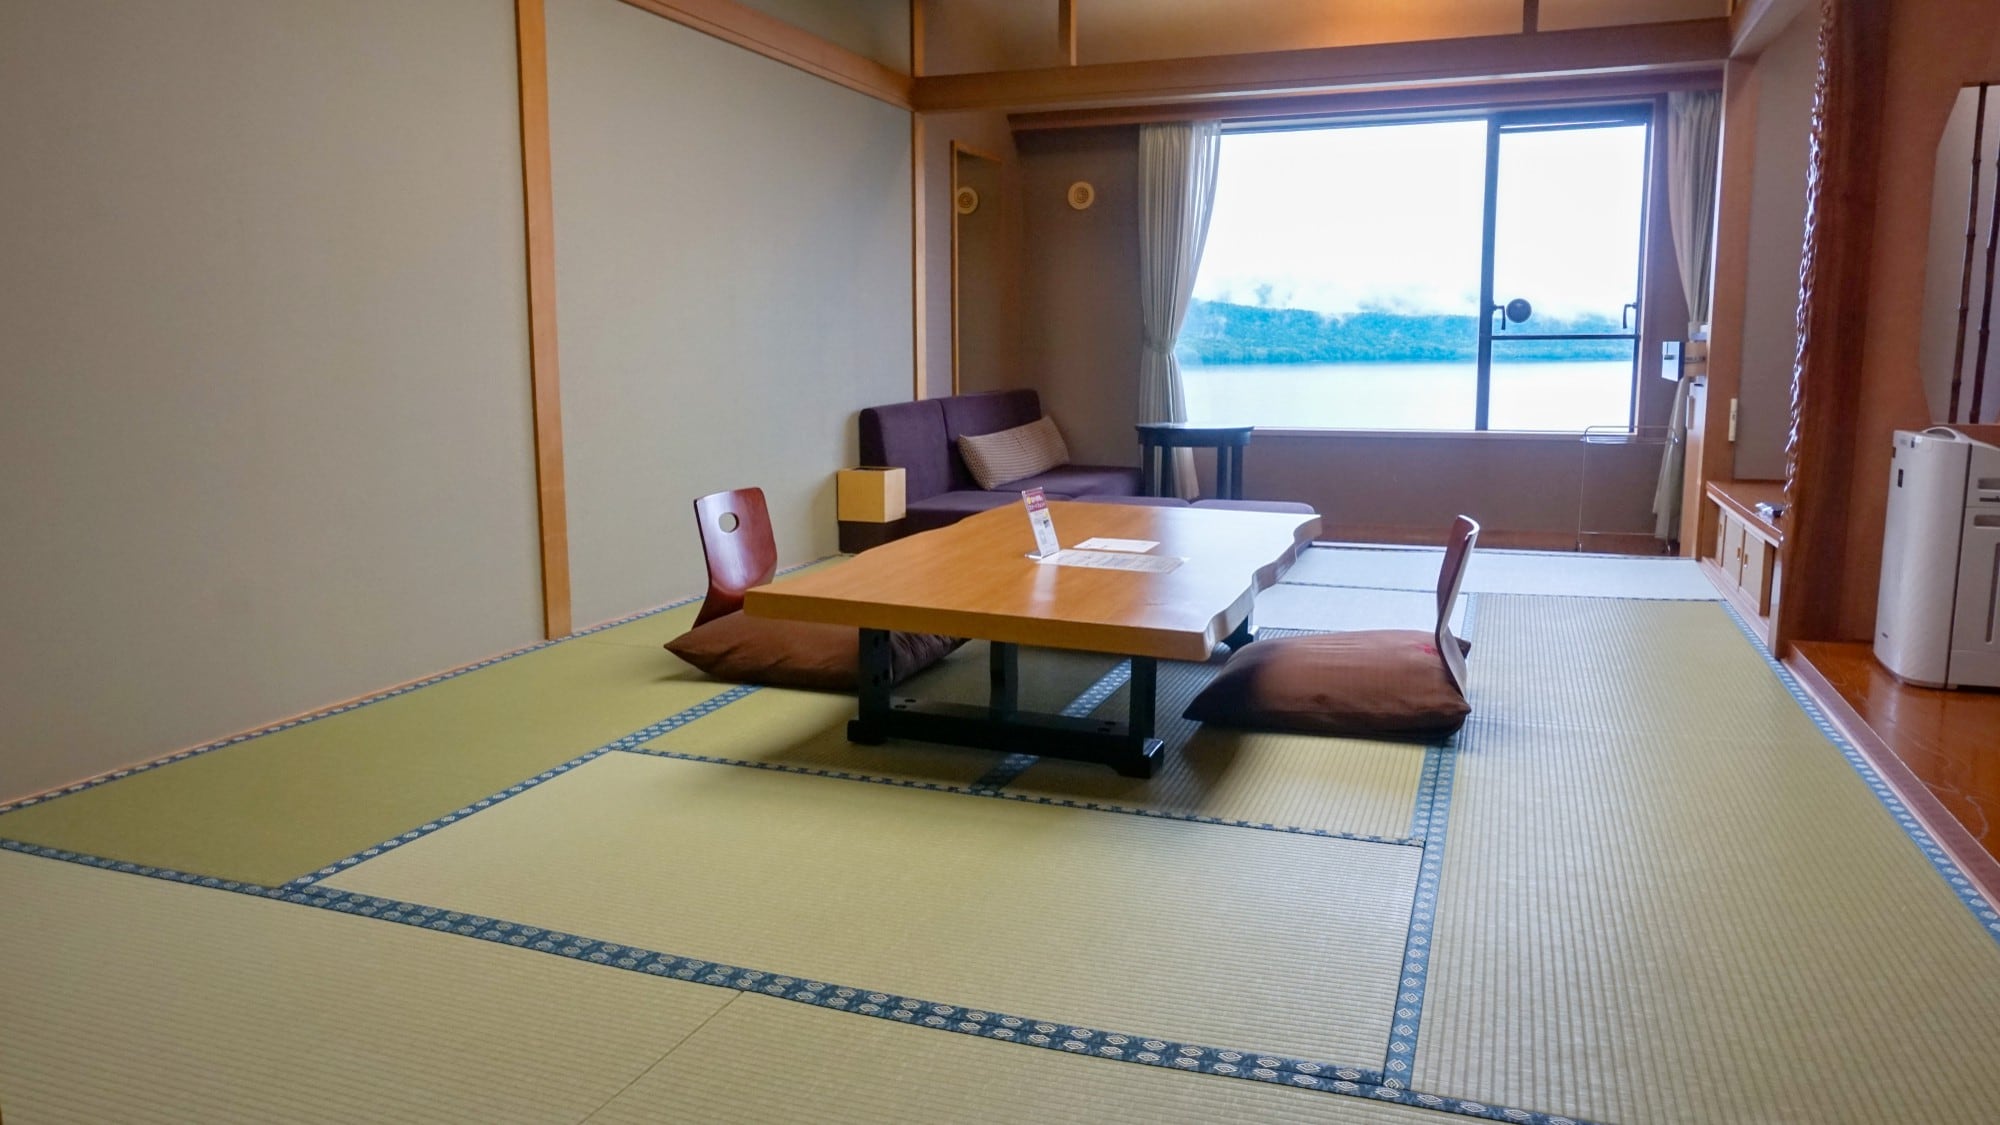 [Lake side] Japanese-style room (with bath) / Japanese-style room where you can stretch your legs and relax (image)